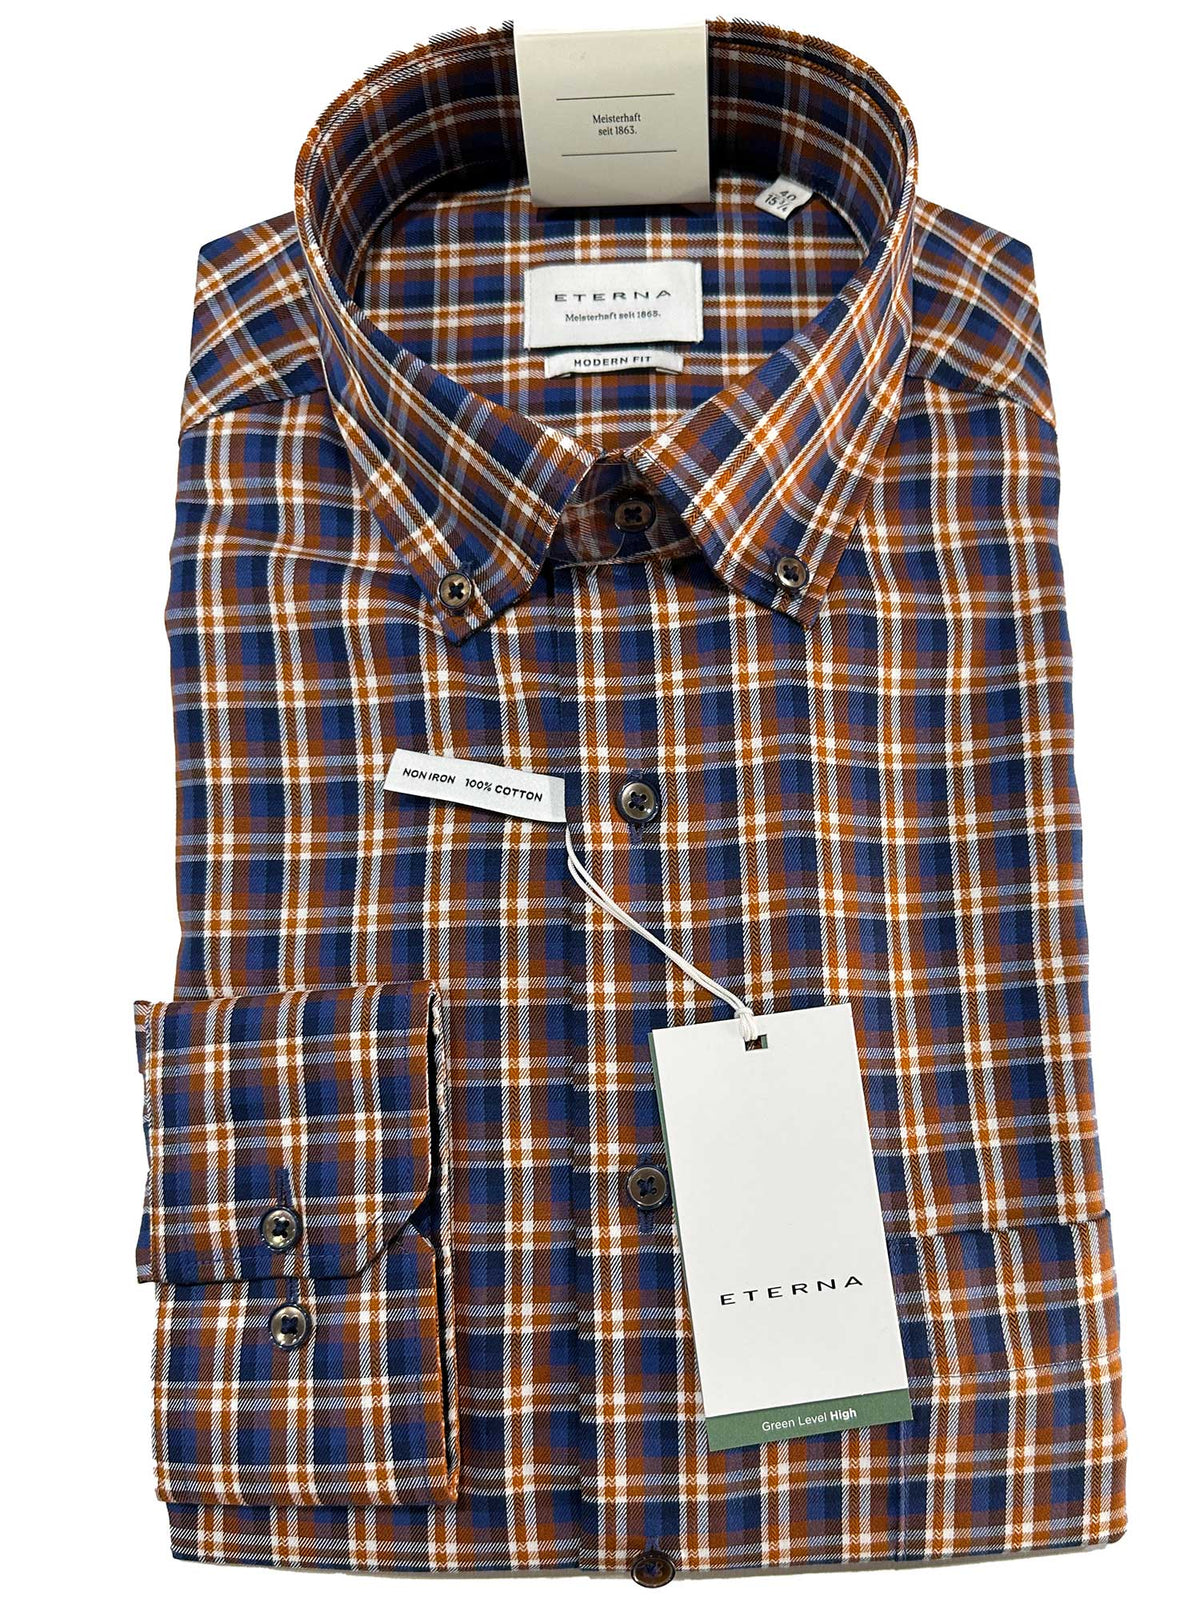 4082/82M  https://harrysformenswear.com.au/products/4082-82m  Eterna Shirts made with super fine cotton. ETERNA produces a wide range of high quality non-iron shirts and blouses. The extensive range includes: Comfort Fit , Modern Fit, Premium, Slim Fit and Super Slim Shirts. The ETERNA collection is based on 100 percent “ fine cotton”, a high-value and non-iron cotton. The fabric…